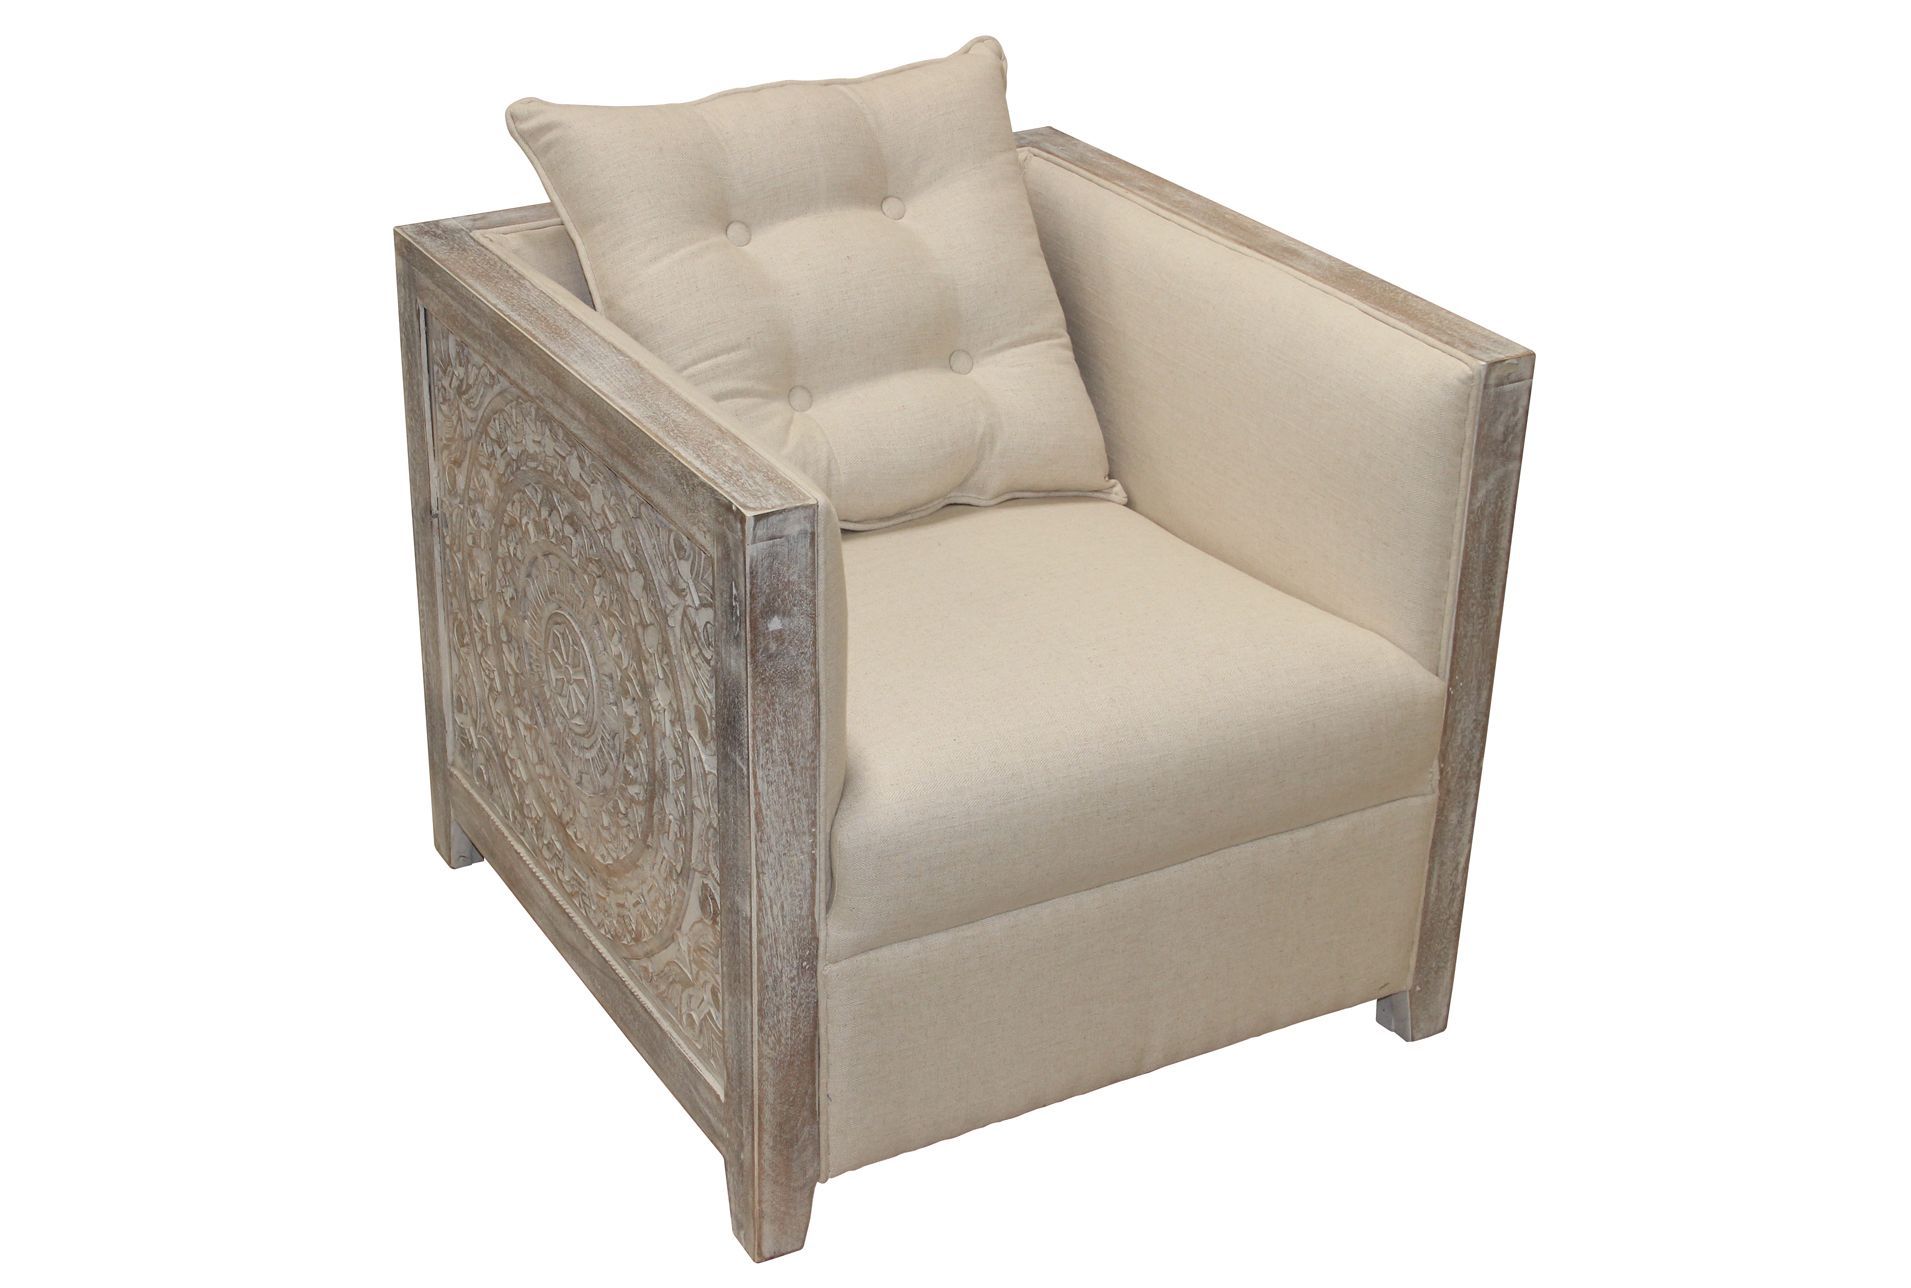 Carved Starburst White Wash Accent Chair | Accent Chairs, Chair, Living Regarding White Washed Wood Accent Stools (View 4 of 20)